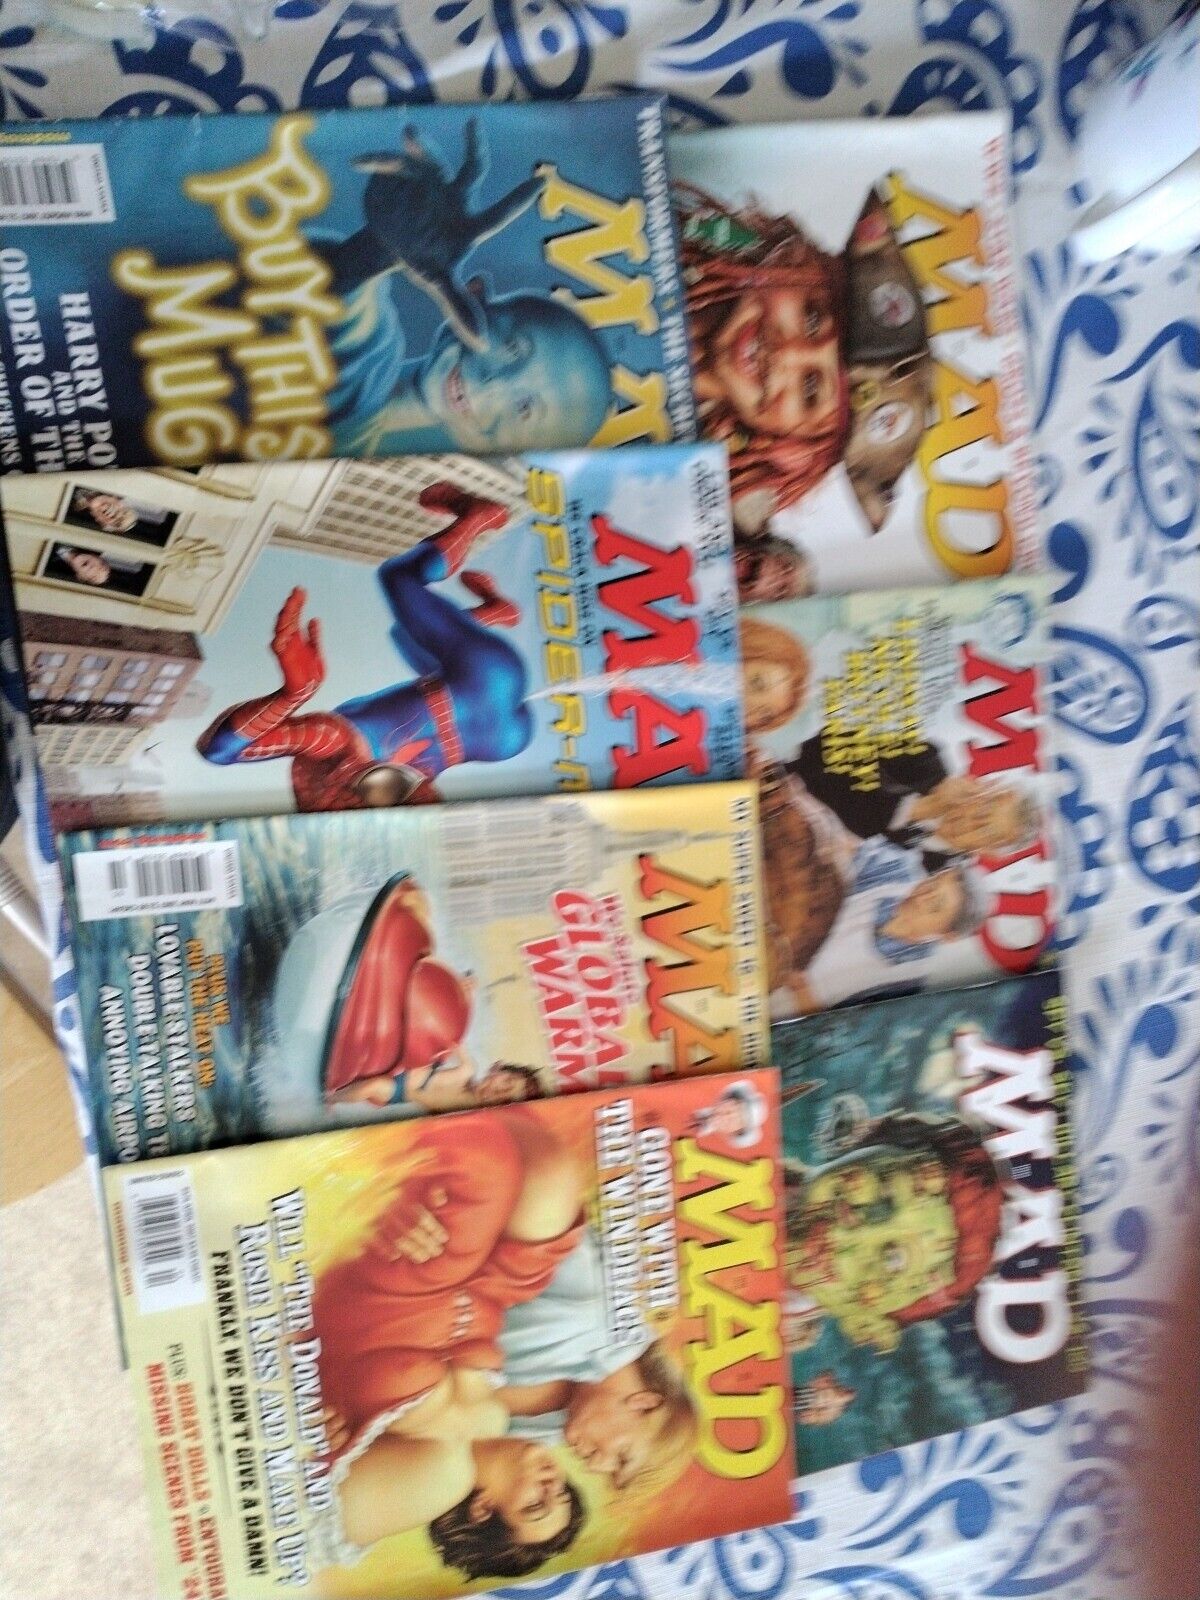 MAD Magazine Lot of 7/2007 issues, great condition